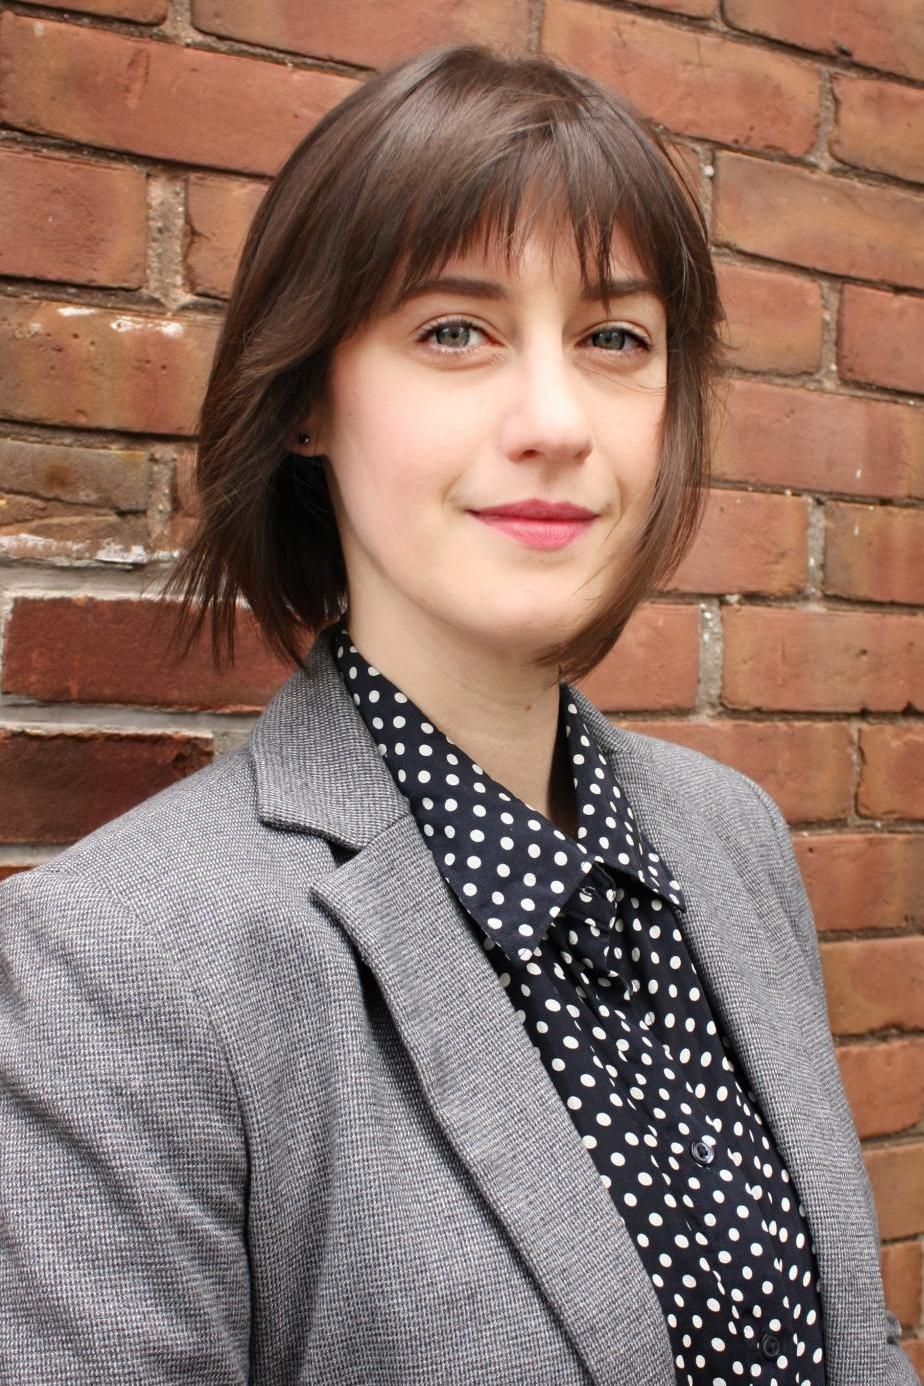 Jessica Bytautas, a white woman with brown hair wearing a grey blazer